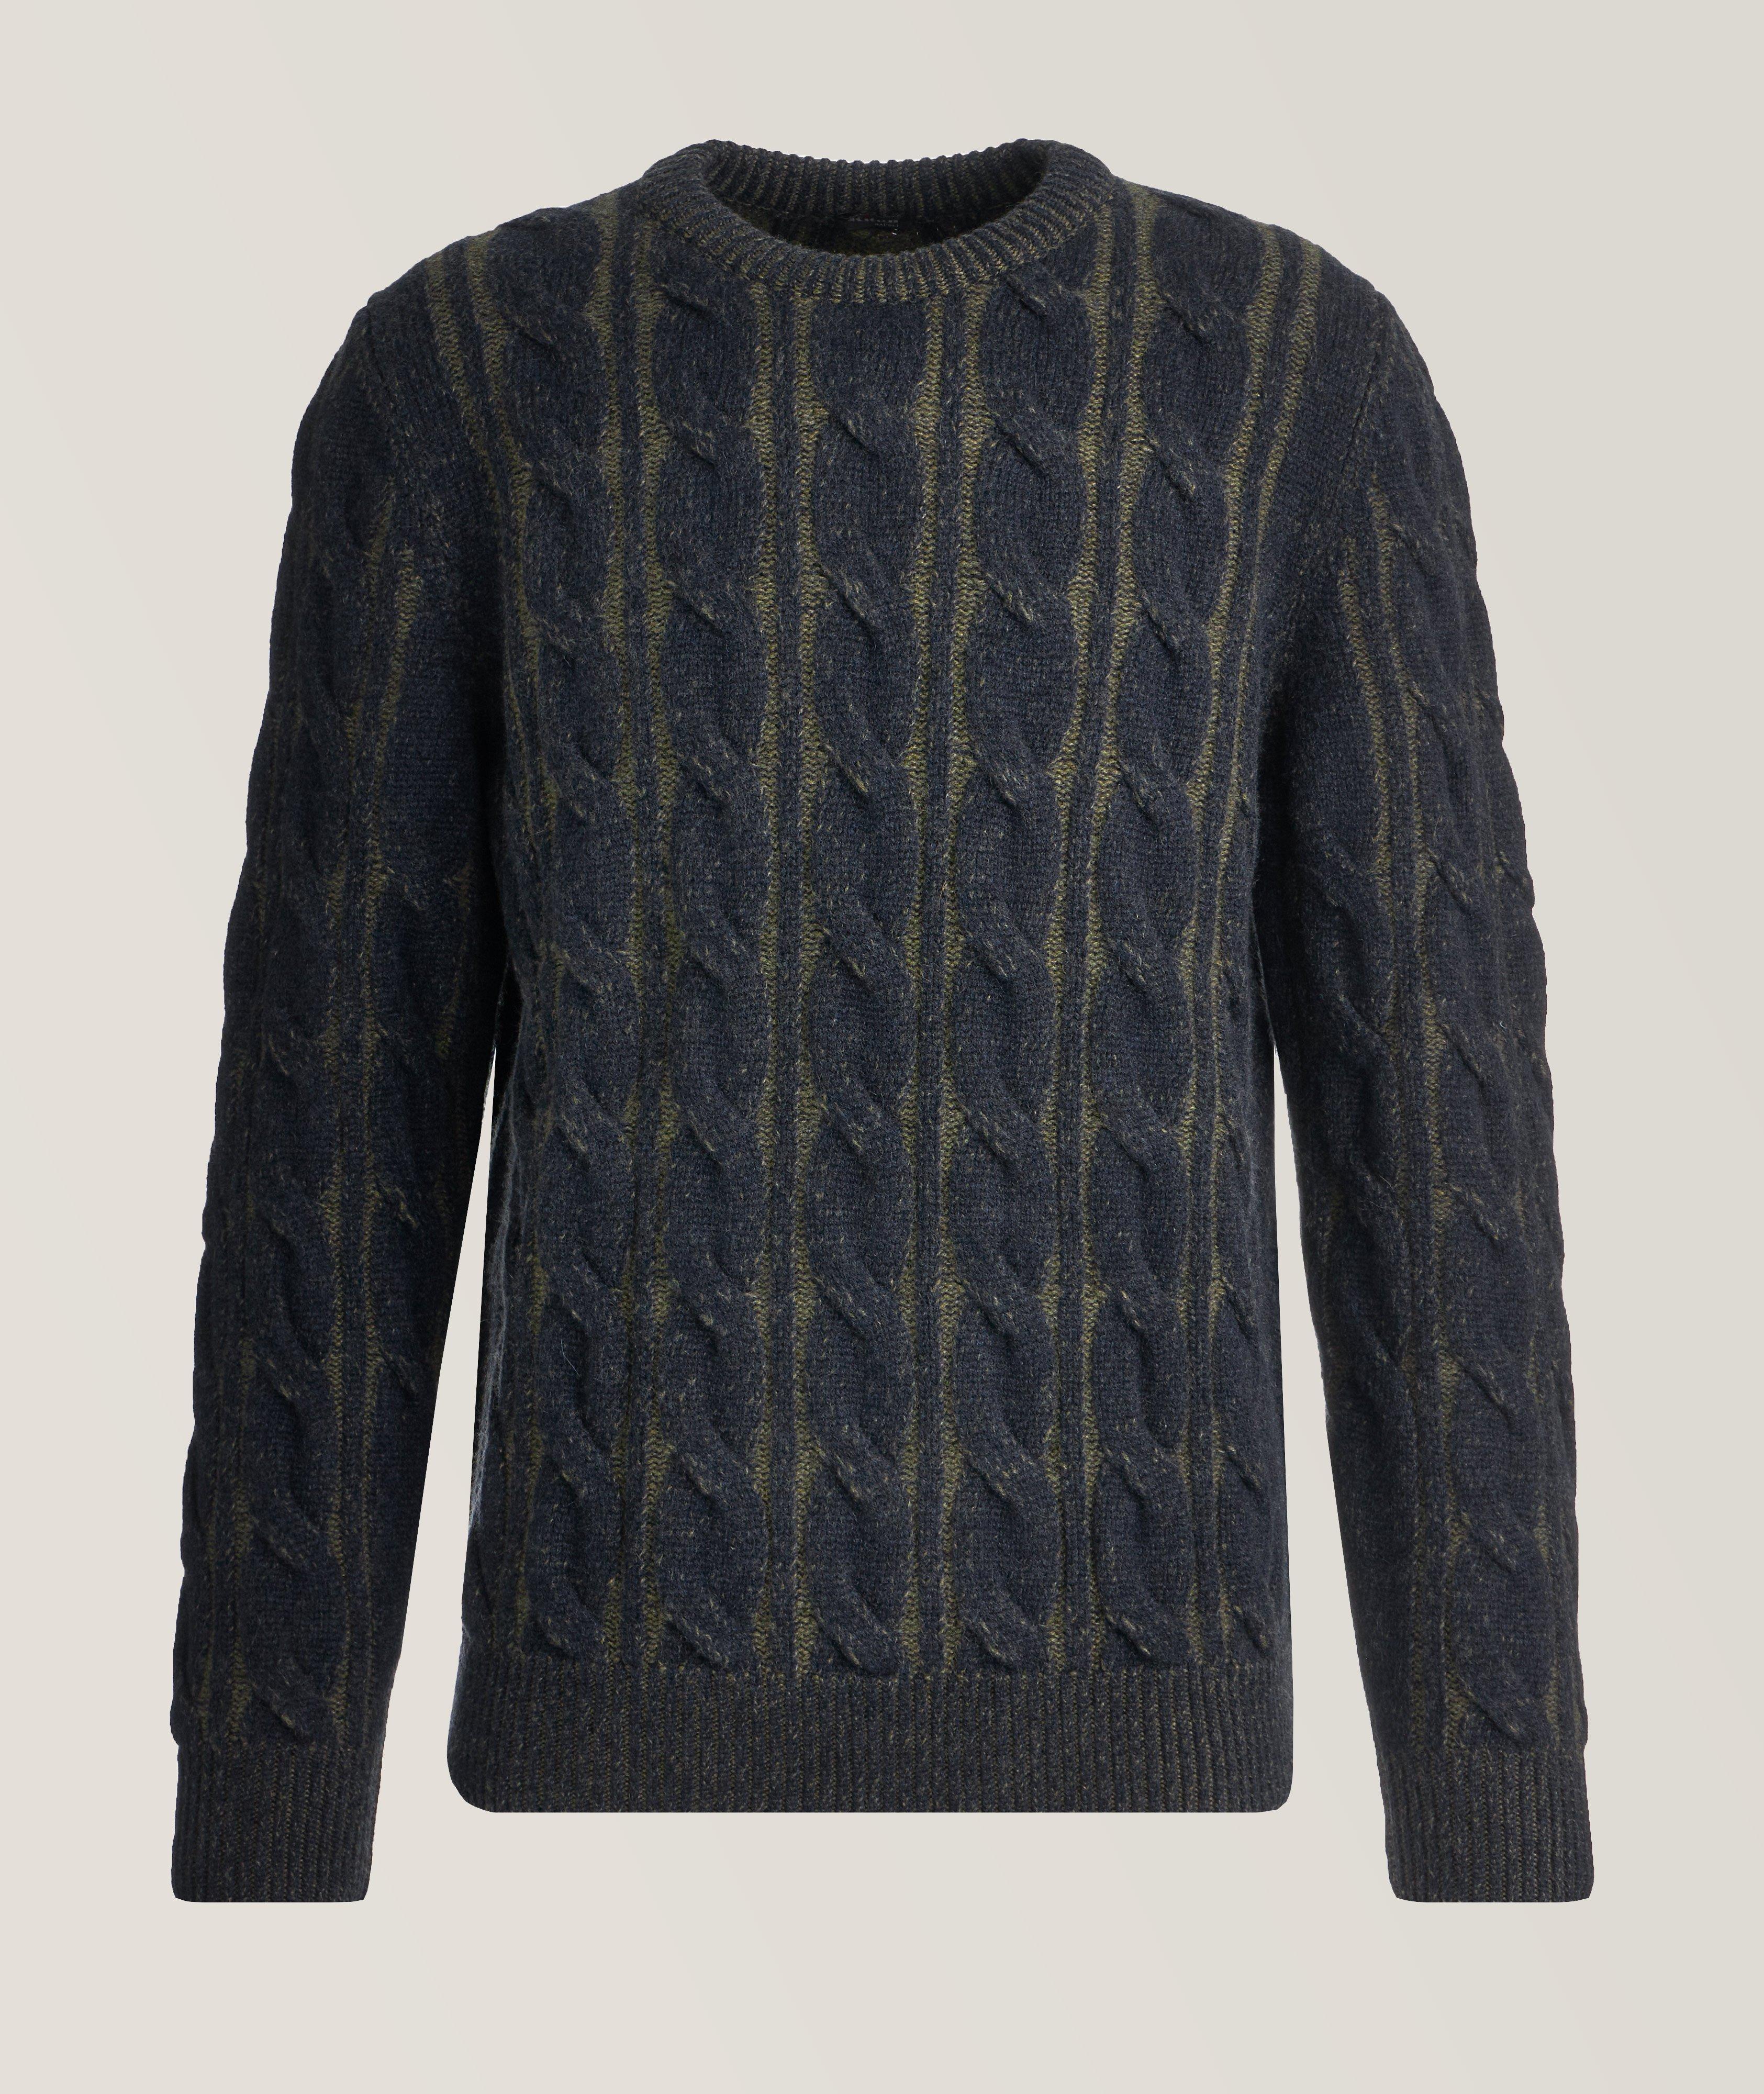 Vanise Cashmere Cable Knit Sweater